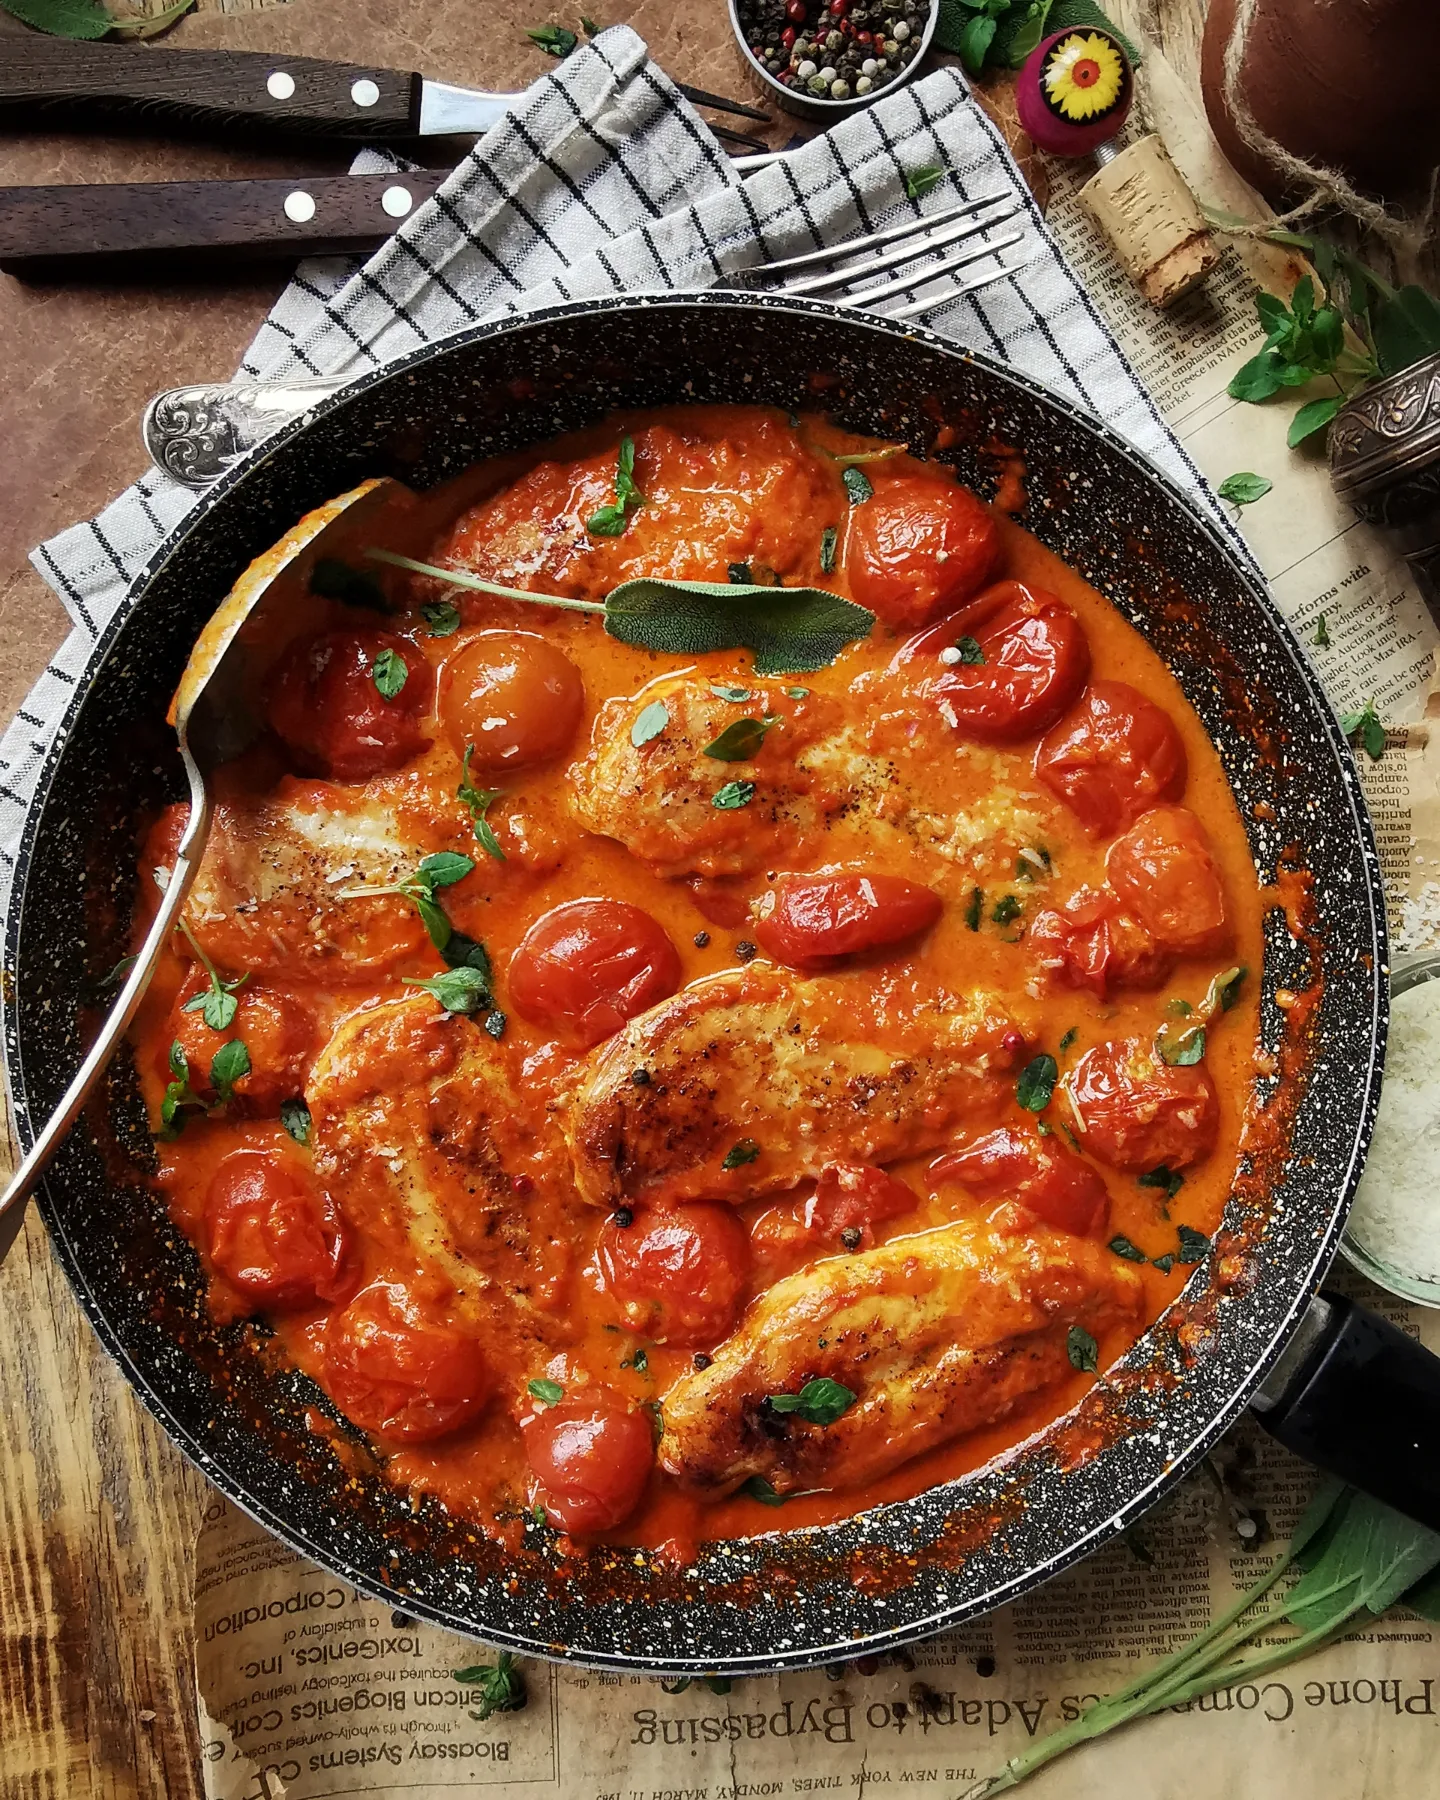 Chicken in delicious roasted red pepper sauce